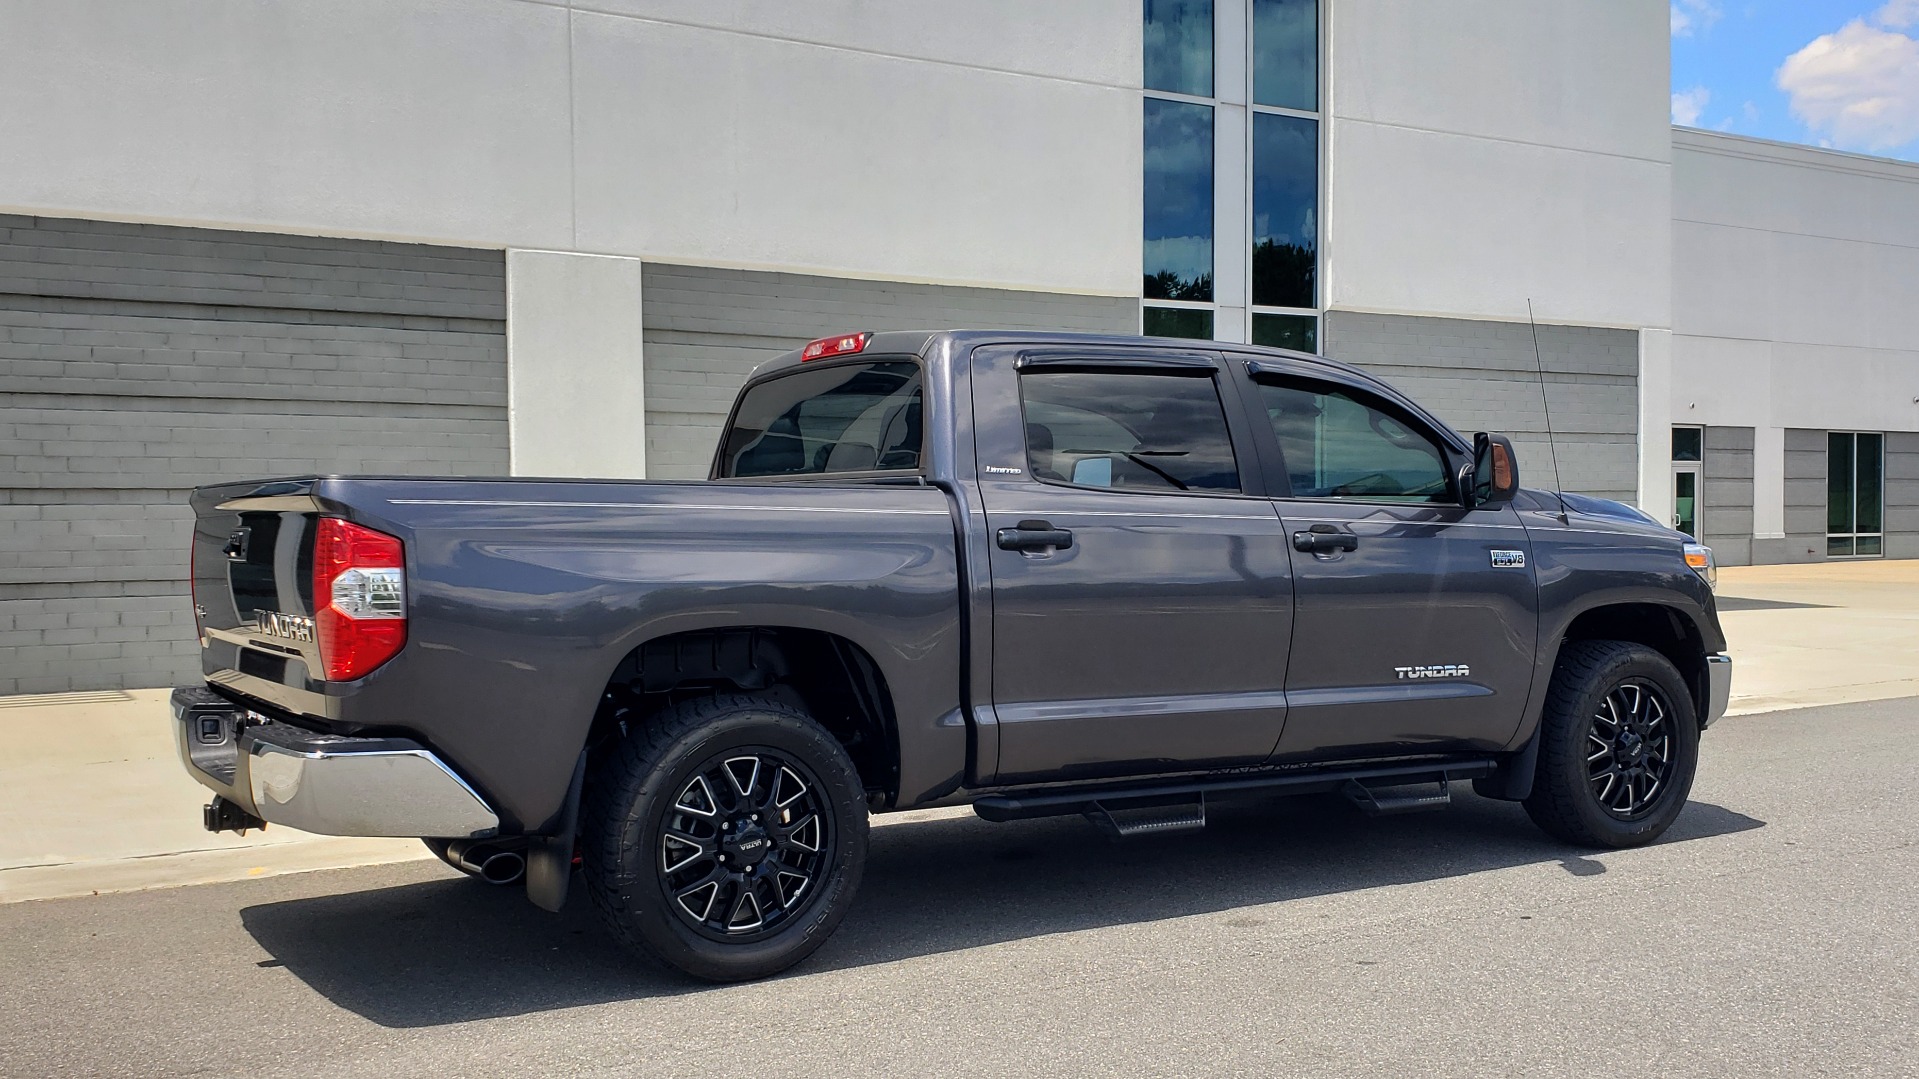 Used 2019 Toyota TUNDRA 4WD LIMITED / 5.7L V8 / 6-SPD AUTO / NAV / SUNROOF / REARVIEW for sale Sold at Formula Imports in Charlotte NC 28227 9